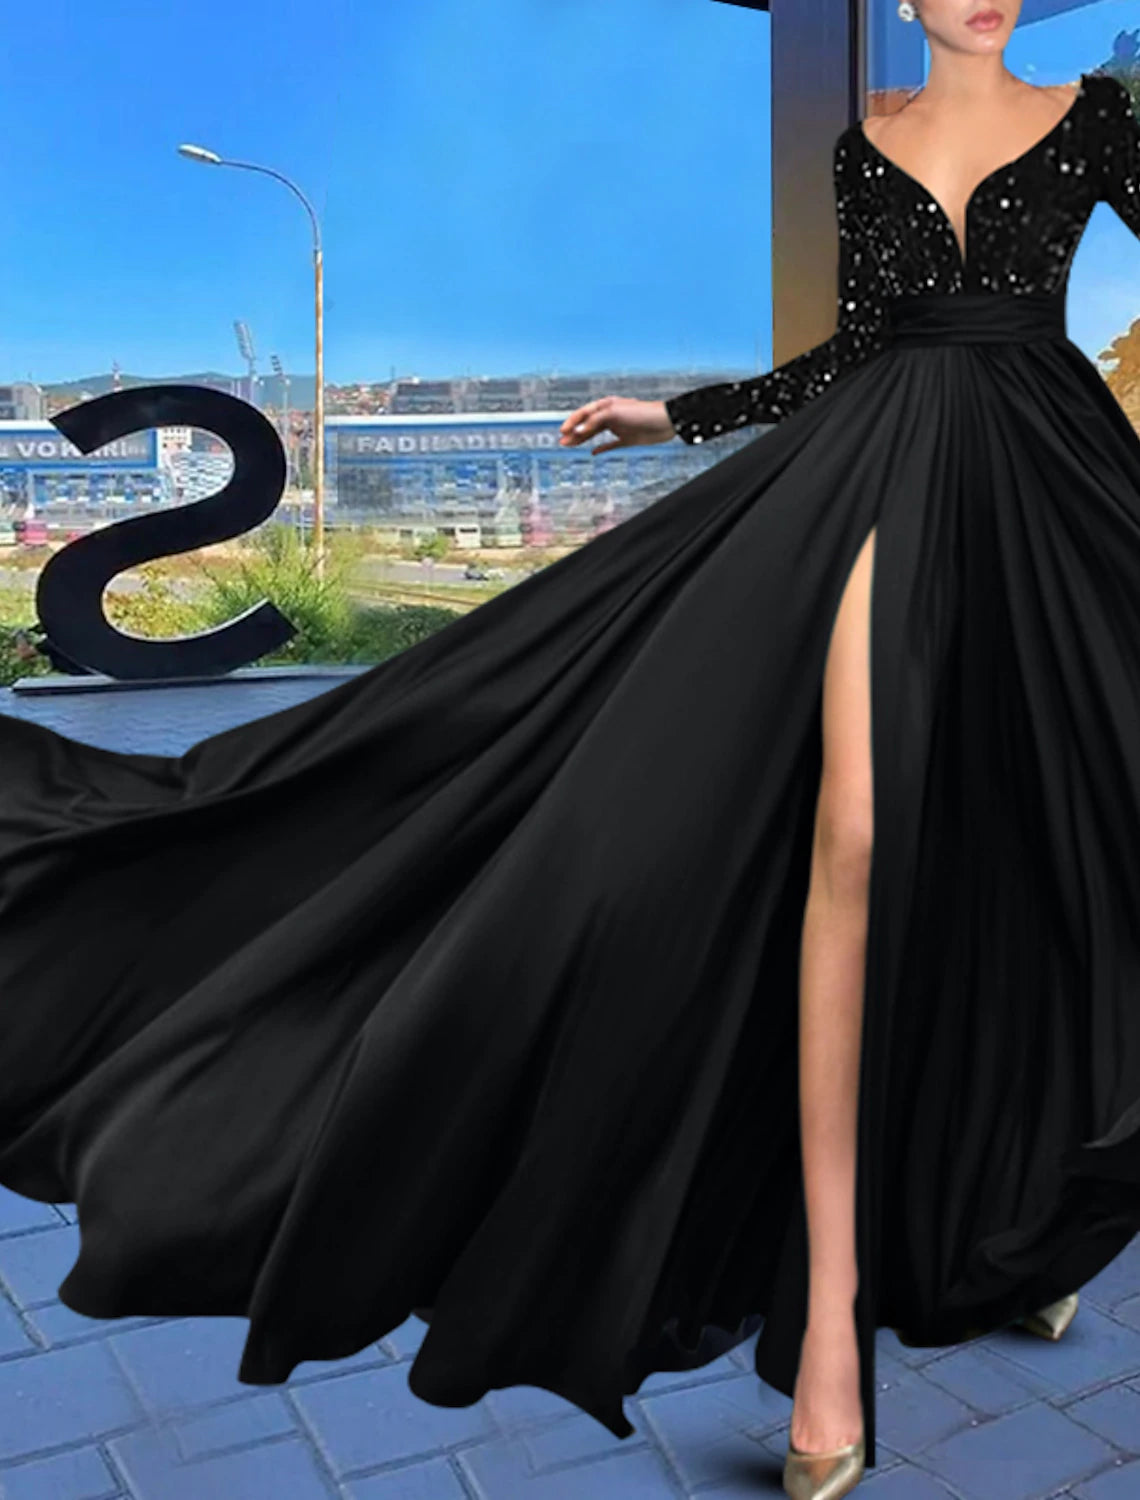 A-Line Evening Gown Sparkle Black Dress Plus Size Wedding Guest Prom Court Train Long Sleeve V Neck Chiffon with Sequin Slit